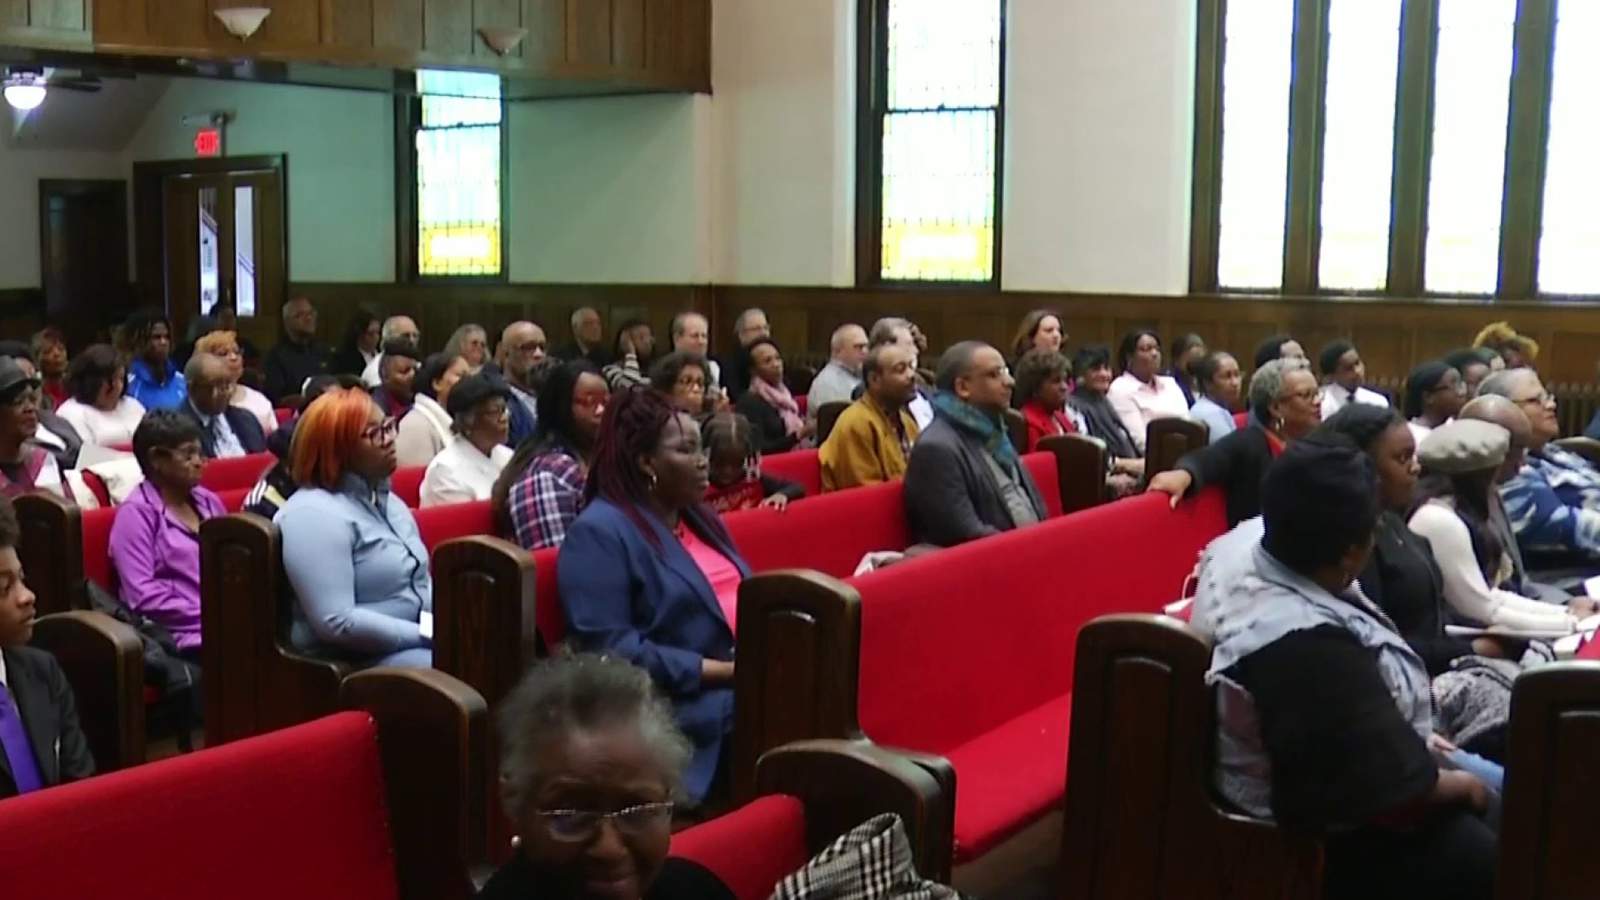 Roanoke NAACP starts off 2020 with Jubilee Day celebration